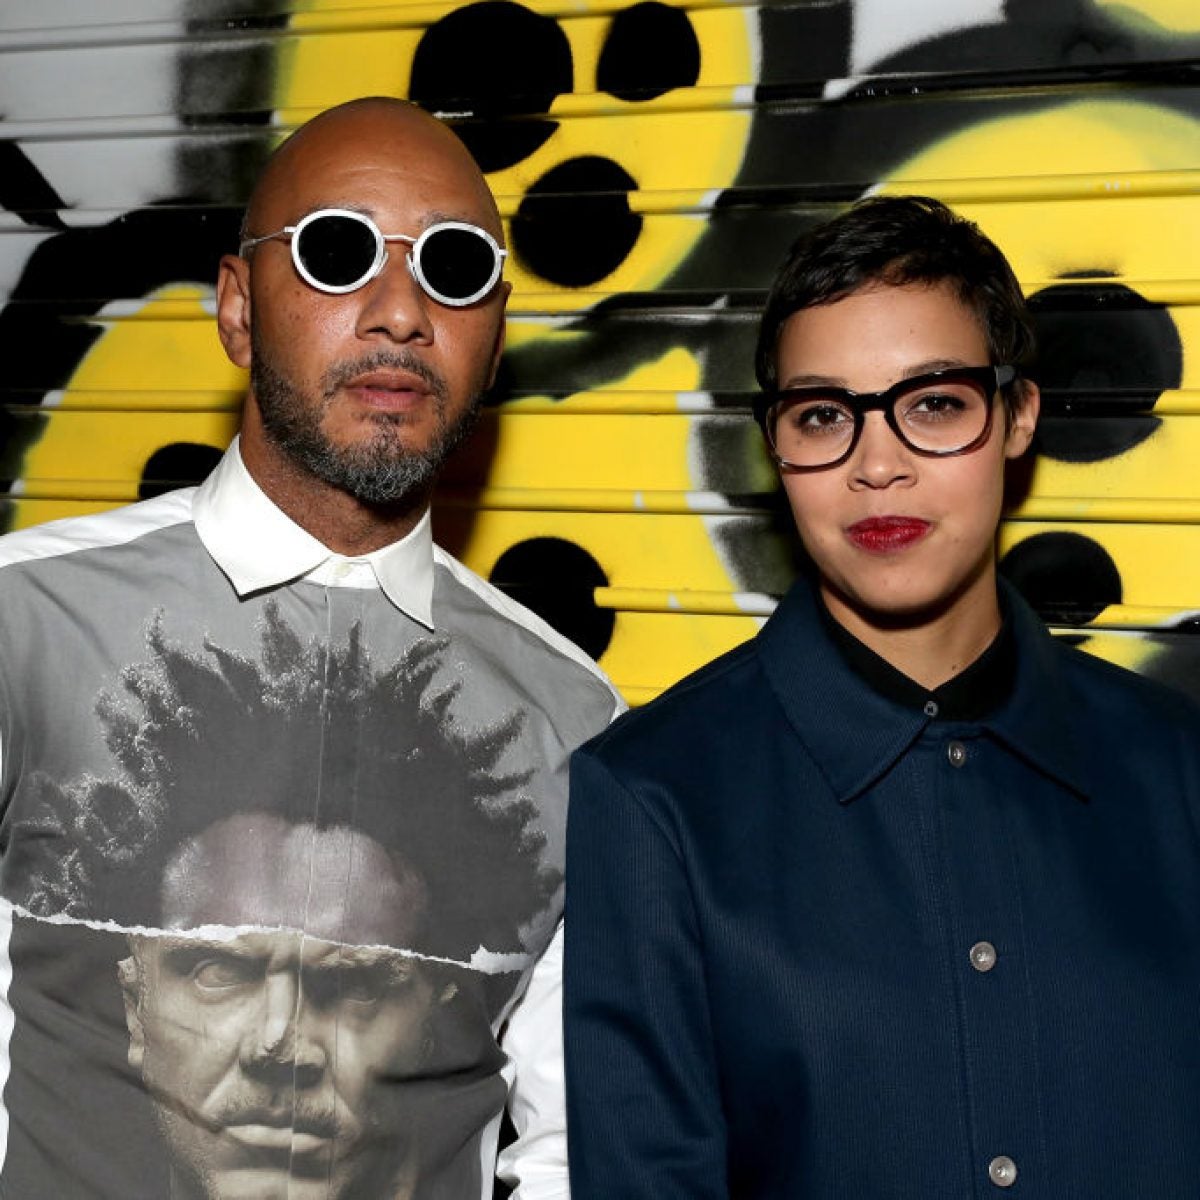 14 Black Contemporary Artists And Curators You Should Know